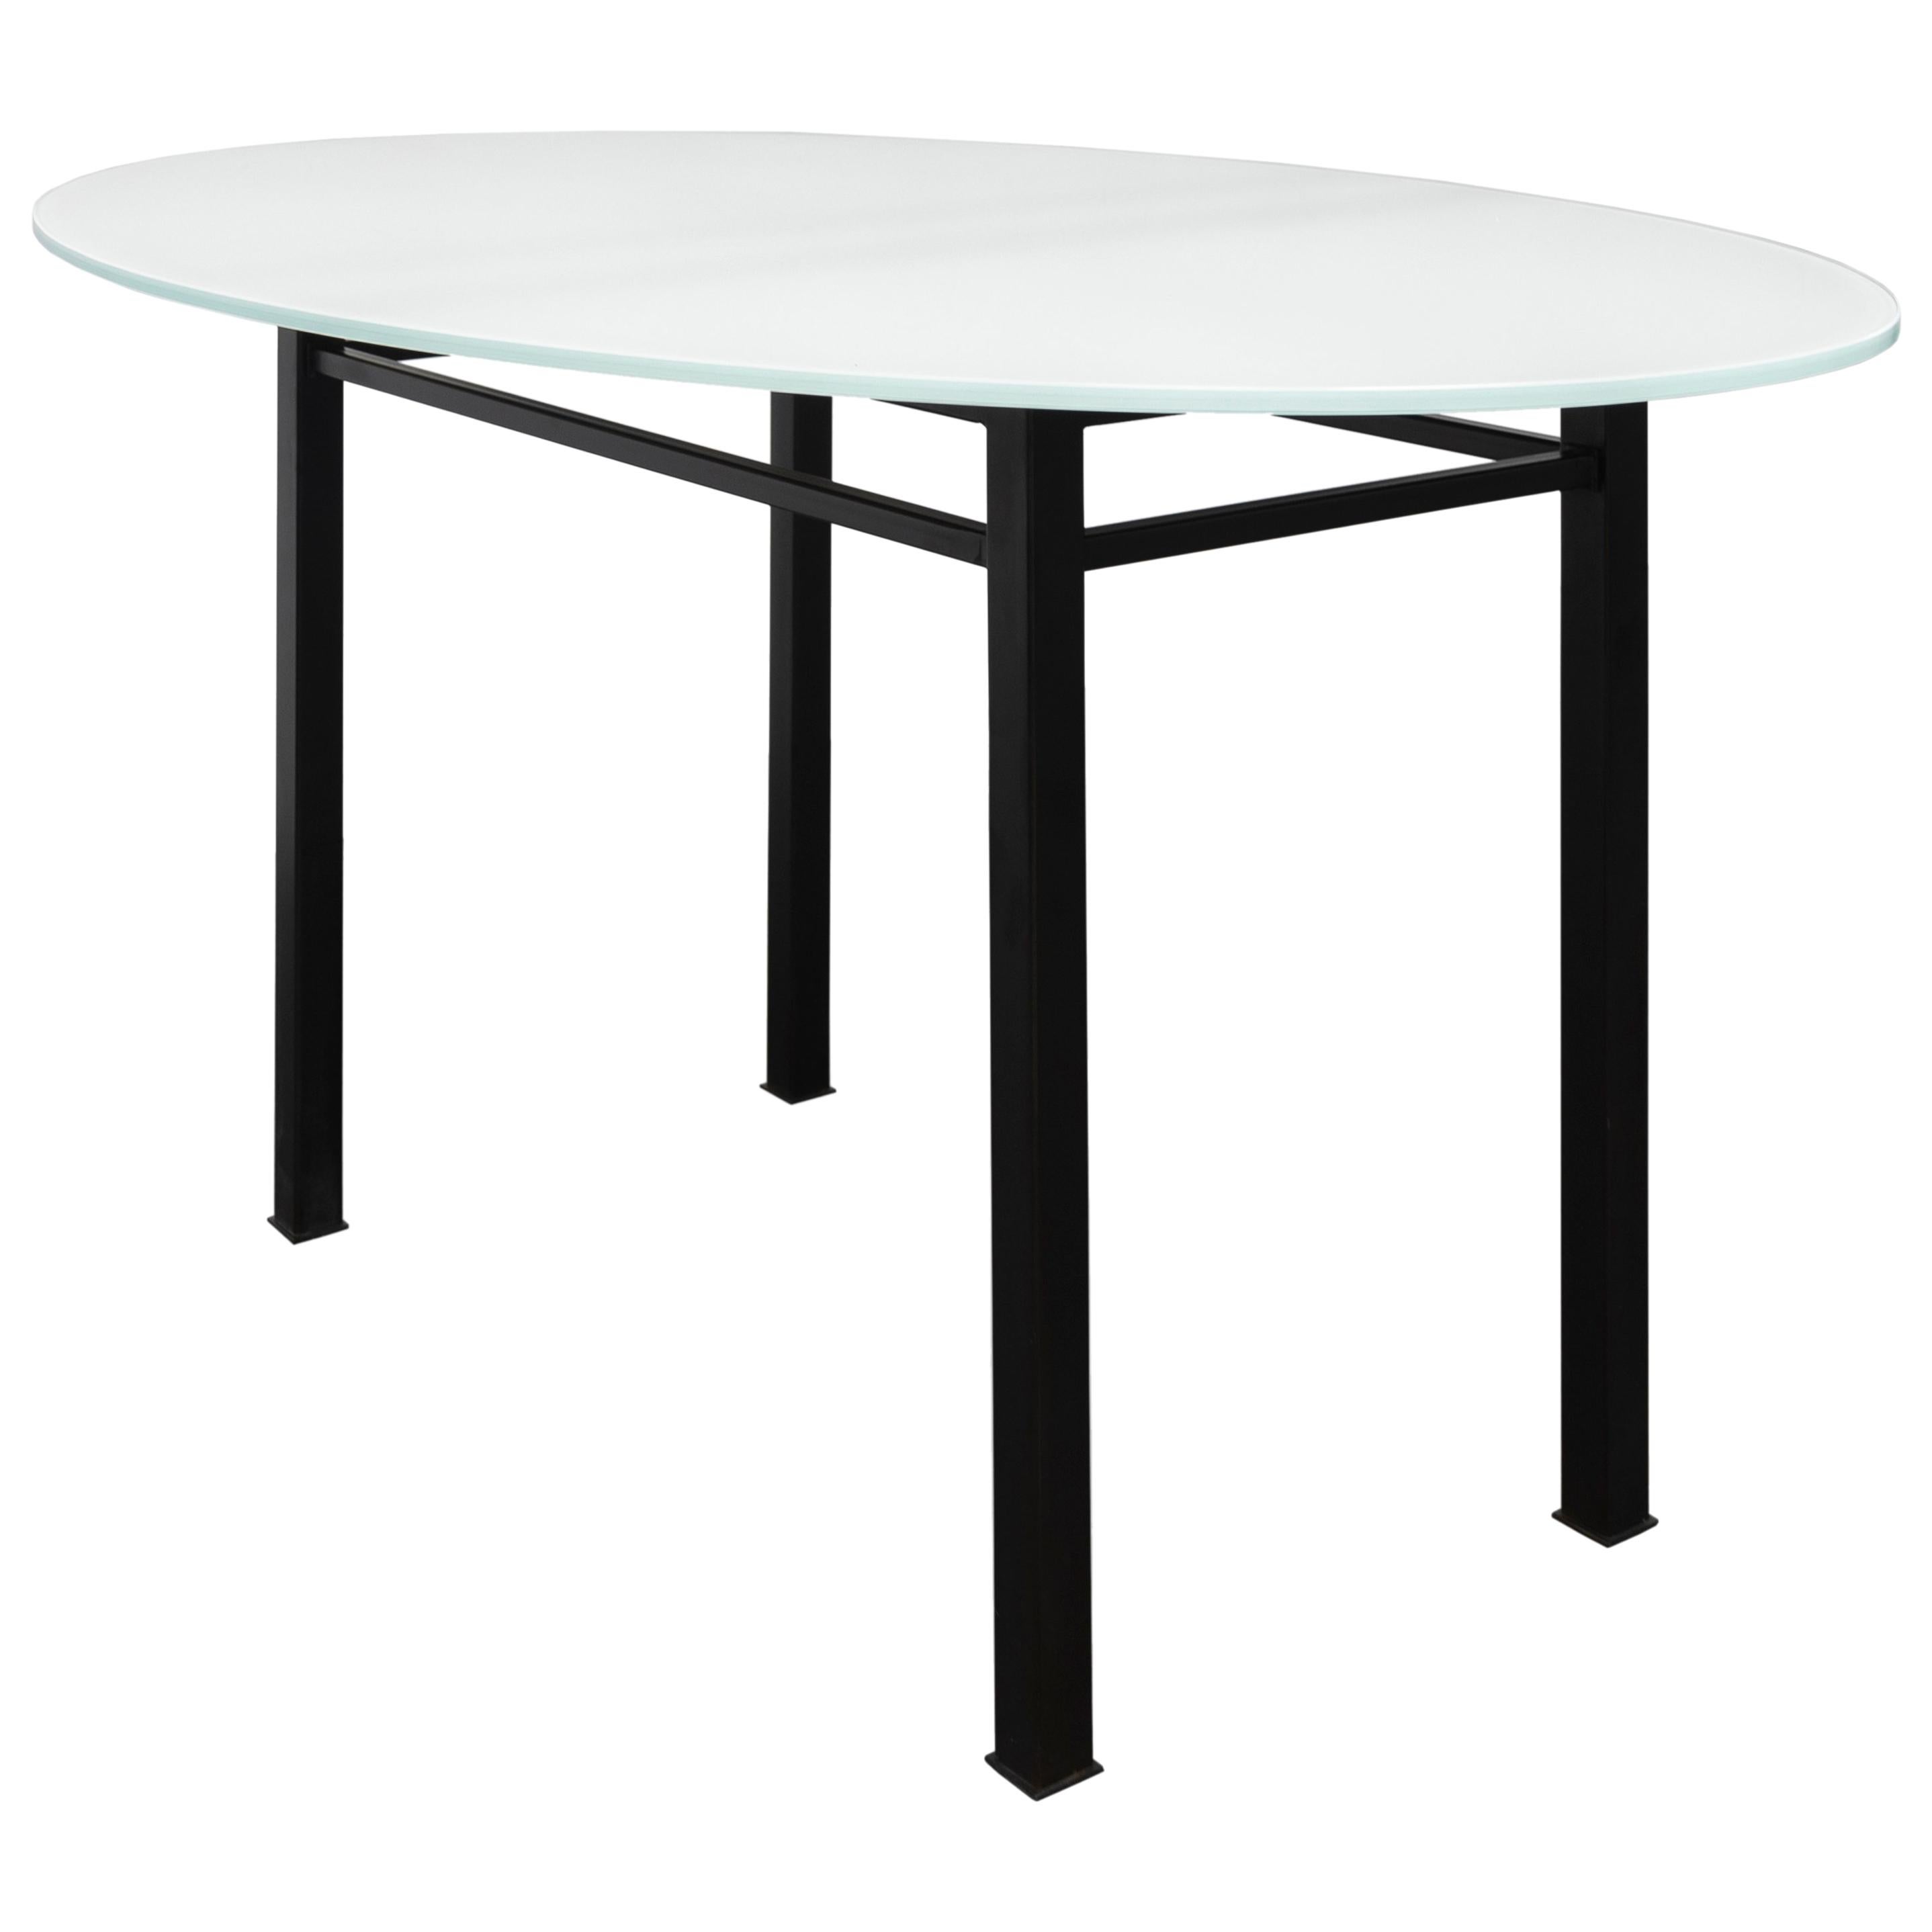 90° Glass & Metal Oval Dining Table, Vica designed by Annabelle Selldorf